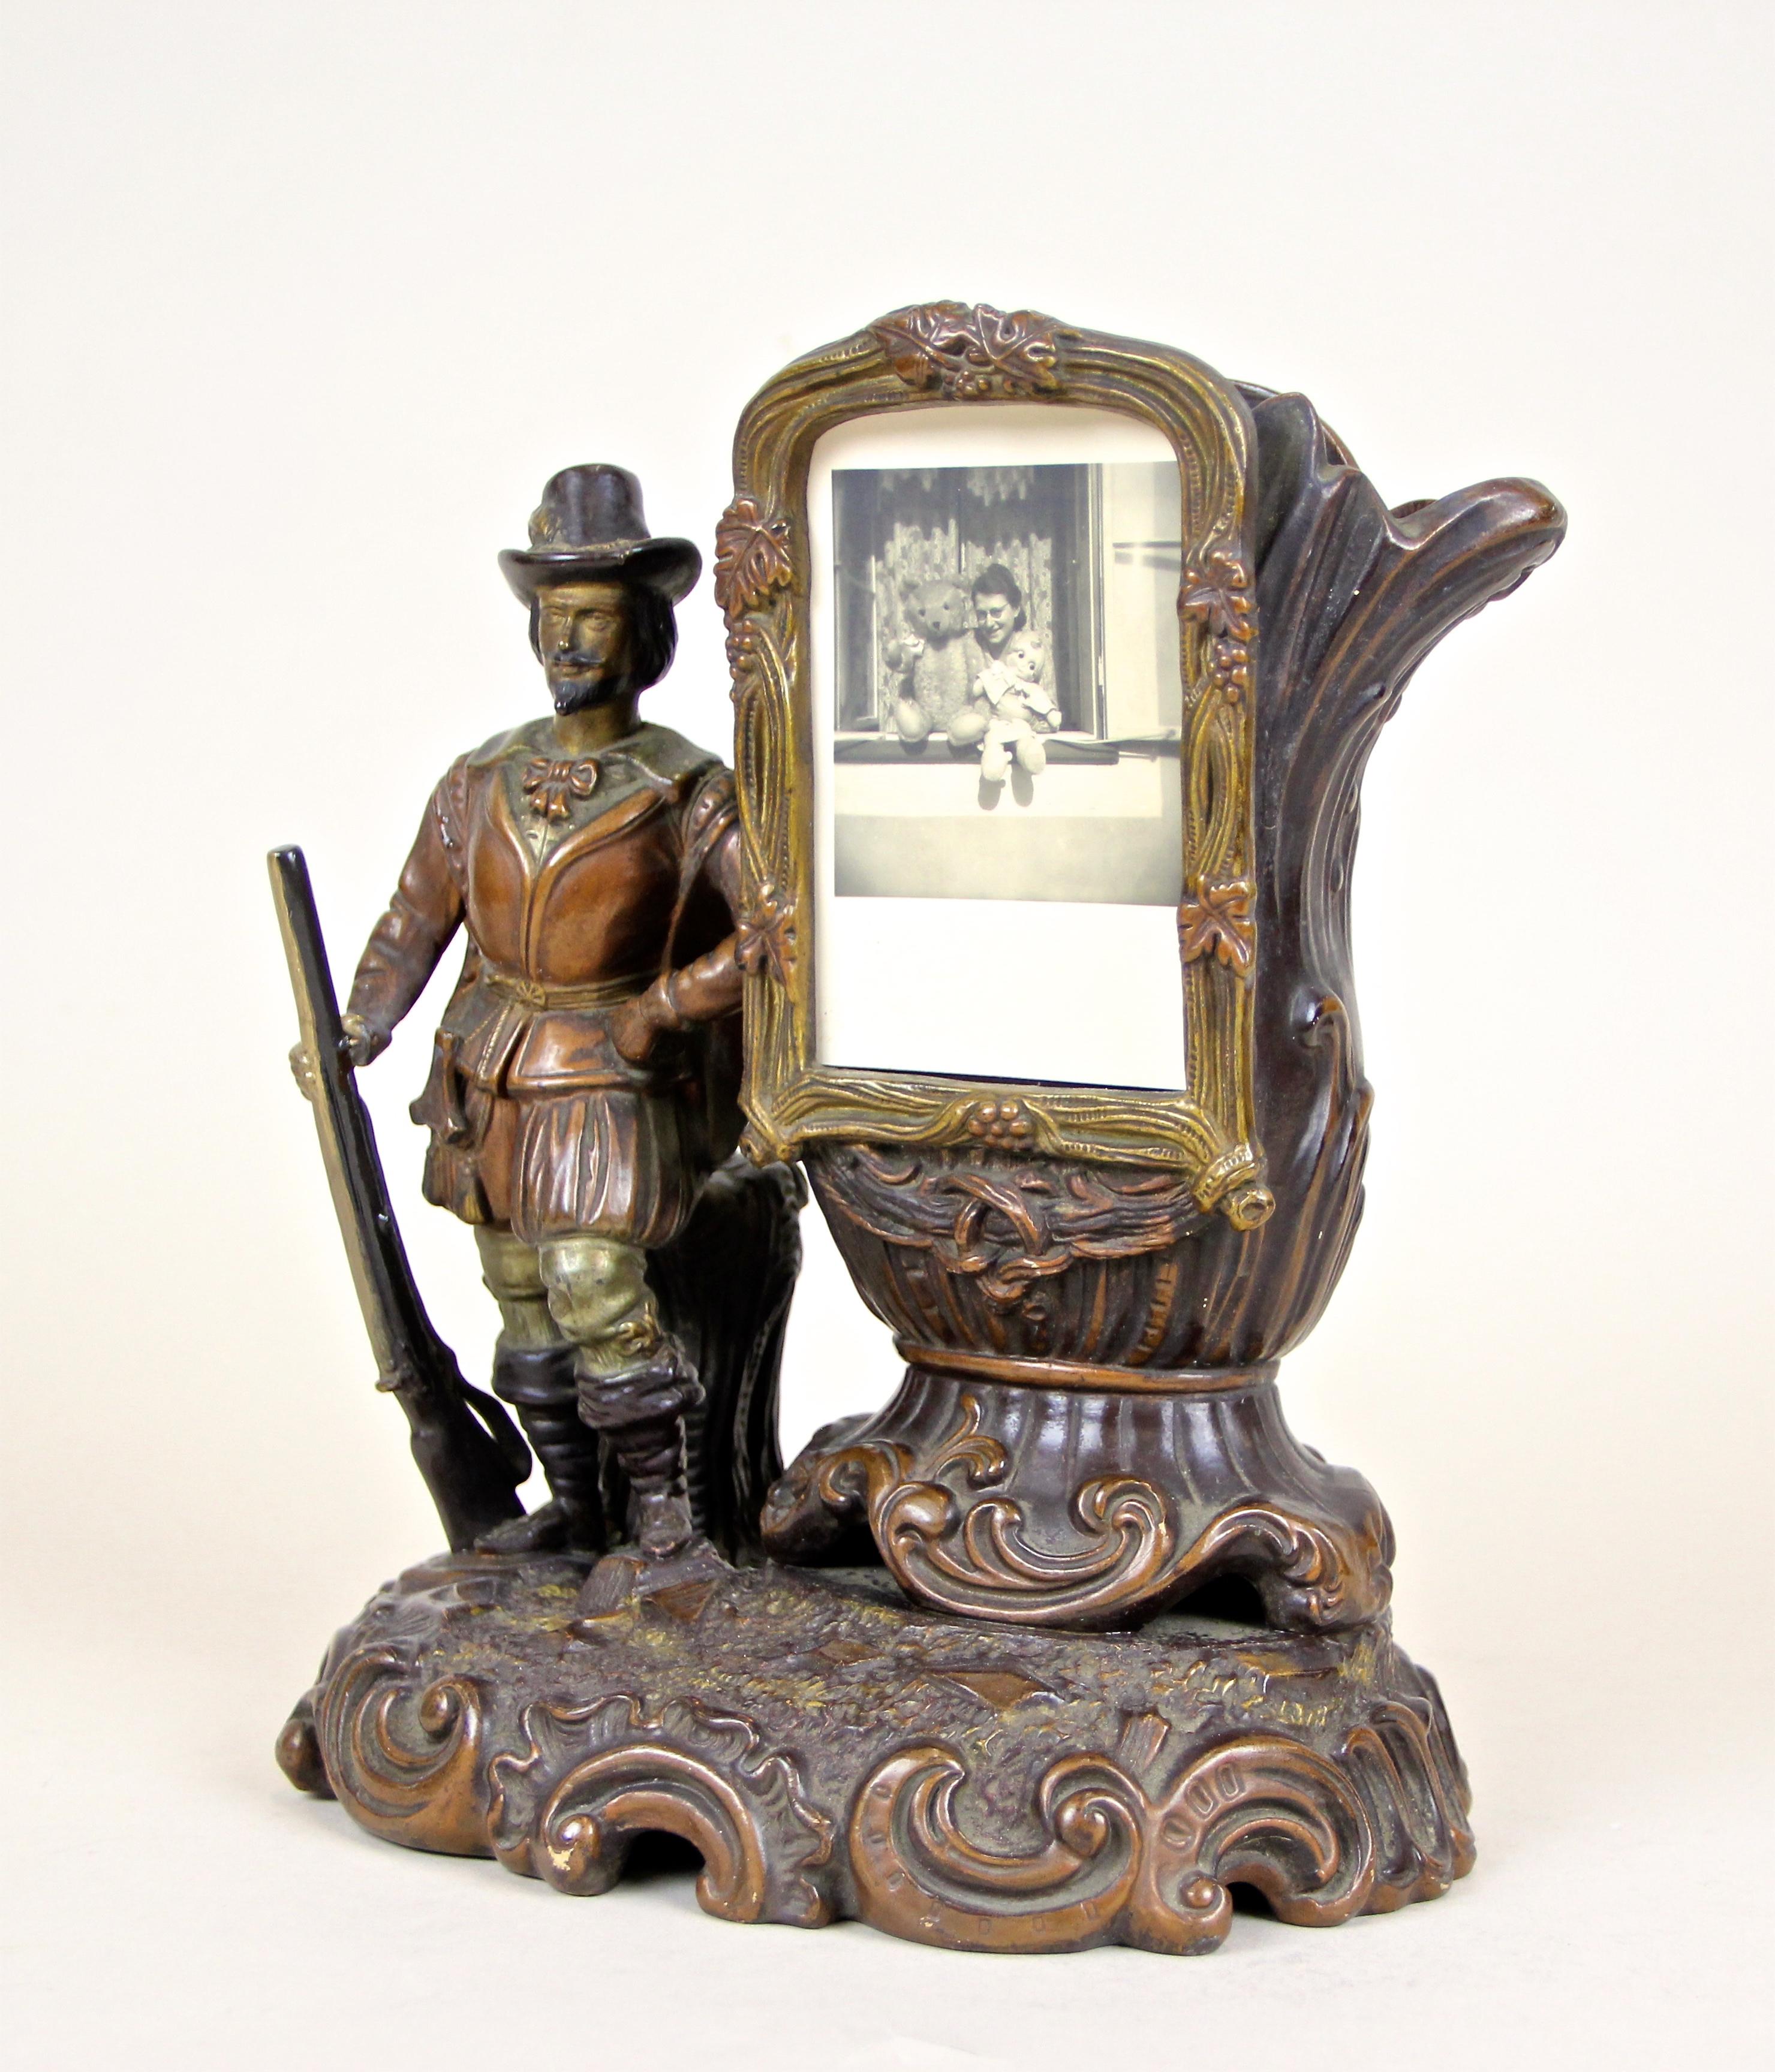 Extraordinary Majolica sculpture vase with photo frame by Johann Maresch, made in Austria, circa 1880. This matchless piece of Majolica depicts a soldier with his gun who leans on the vase´s body. A very unusual item with amazing processed surface